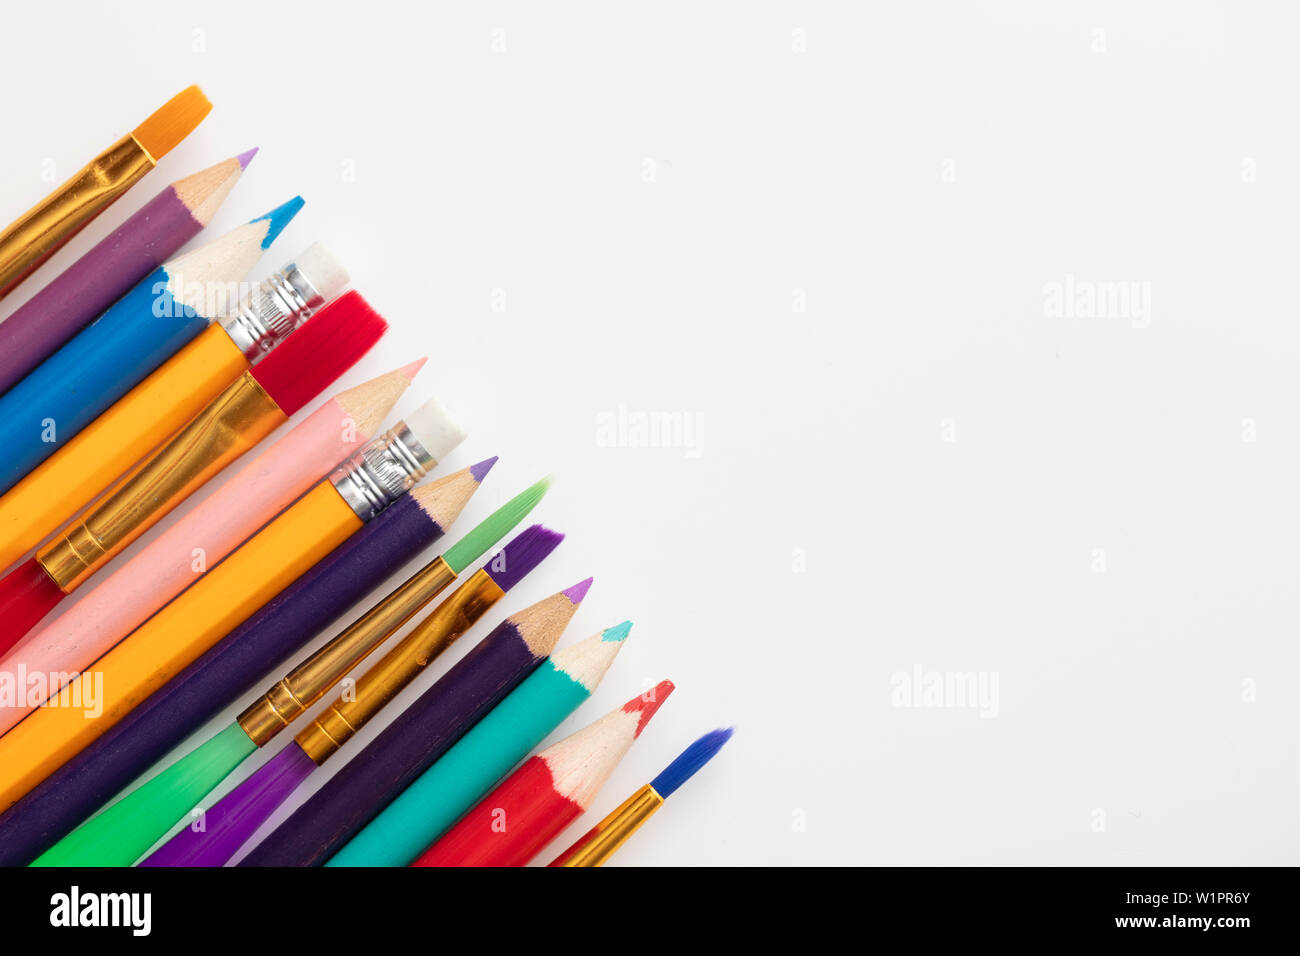 Row of school art and craft supplies on a white background Stock Photo -  Alamy